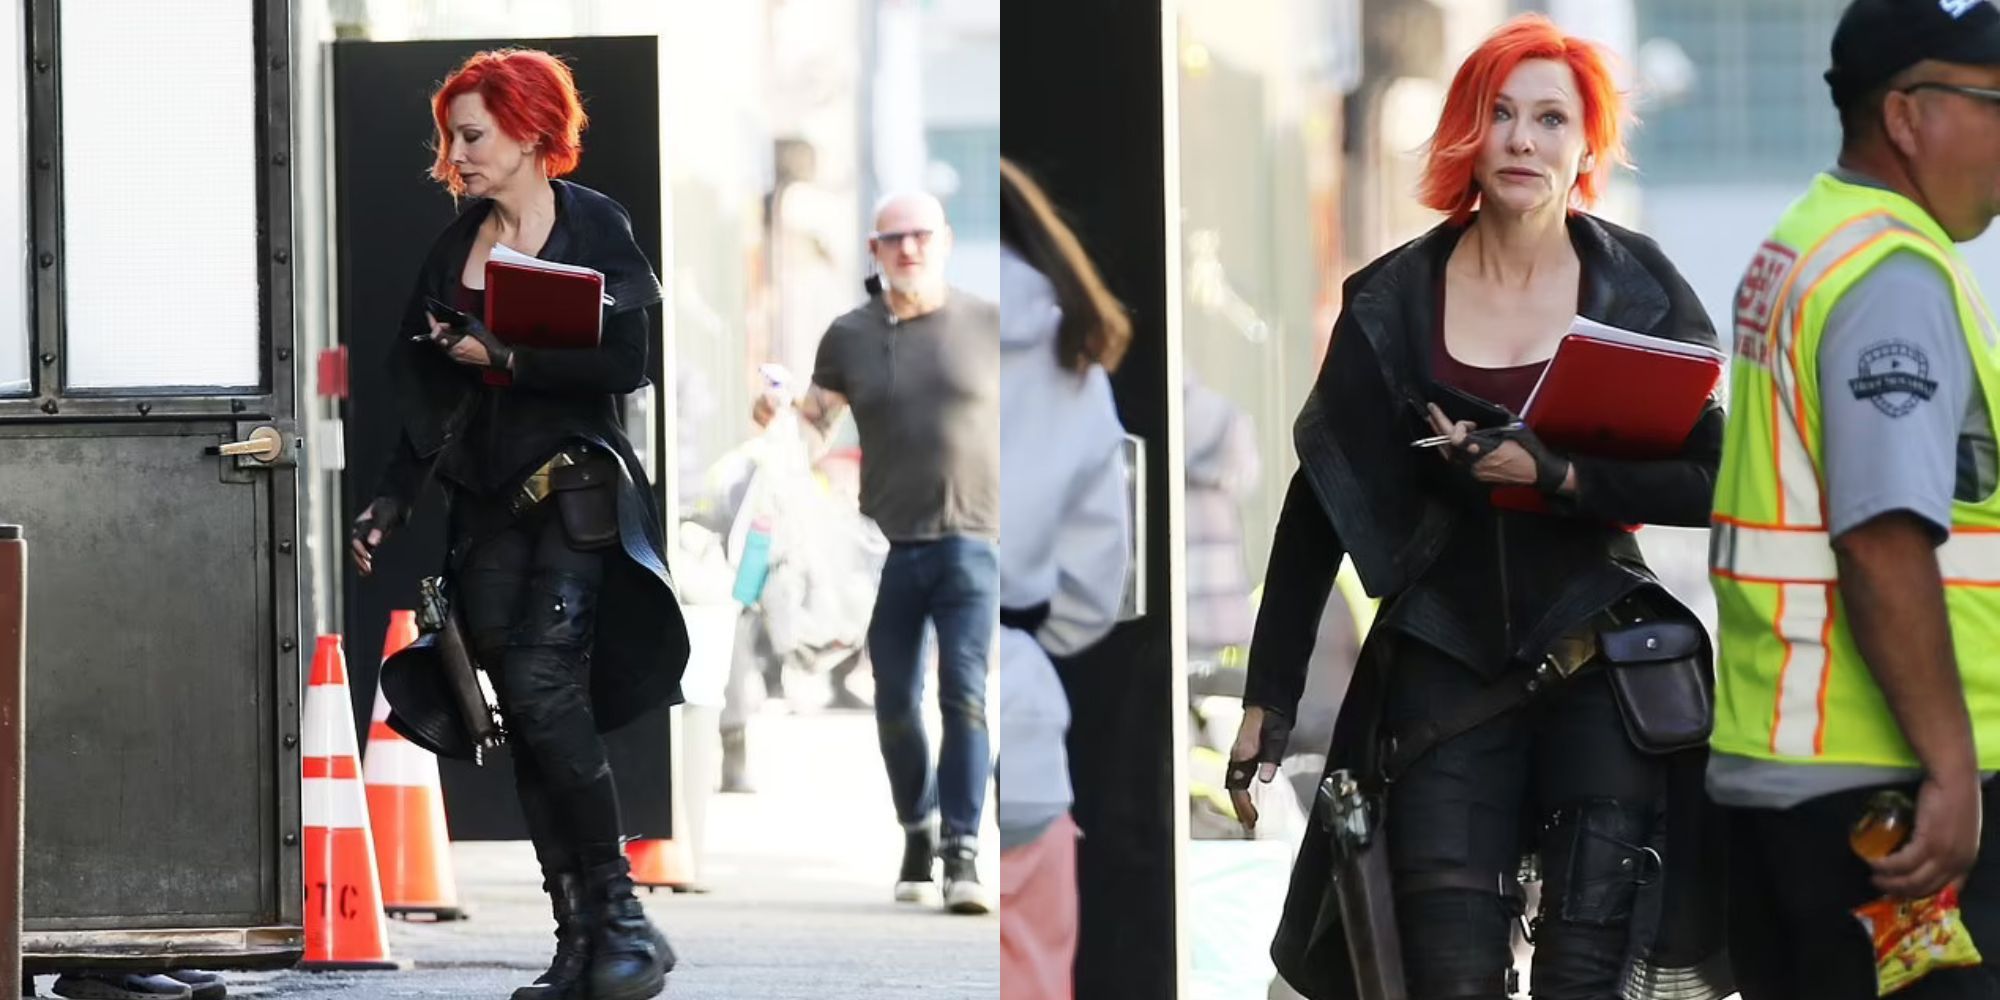 Cate Blanchett on the Borderlands movie set, holding the script in outfit while walking around